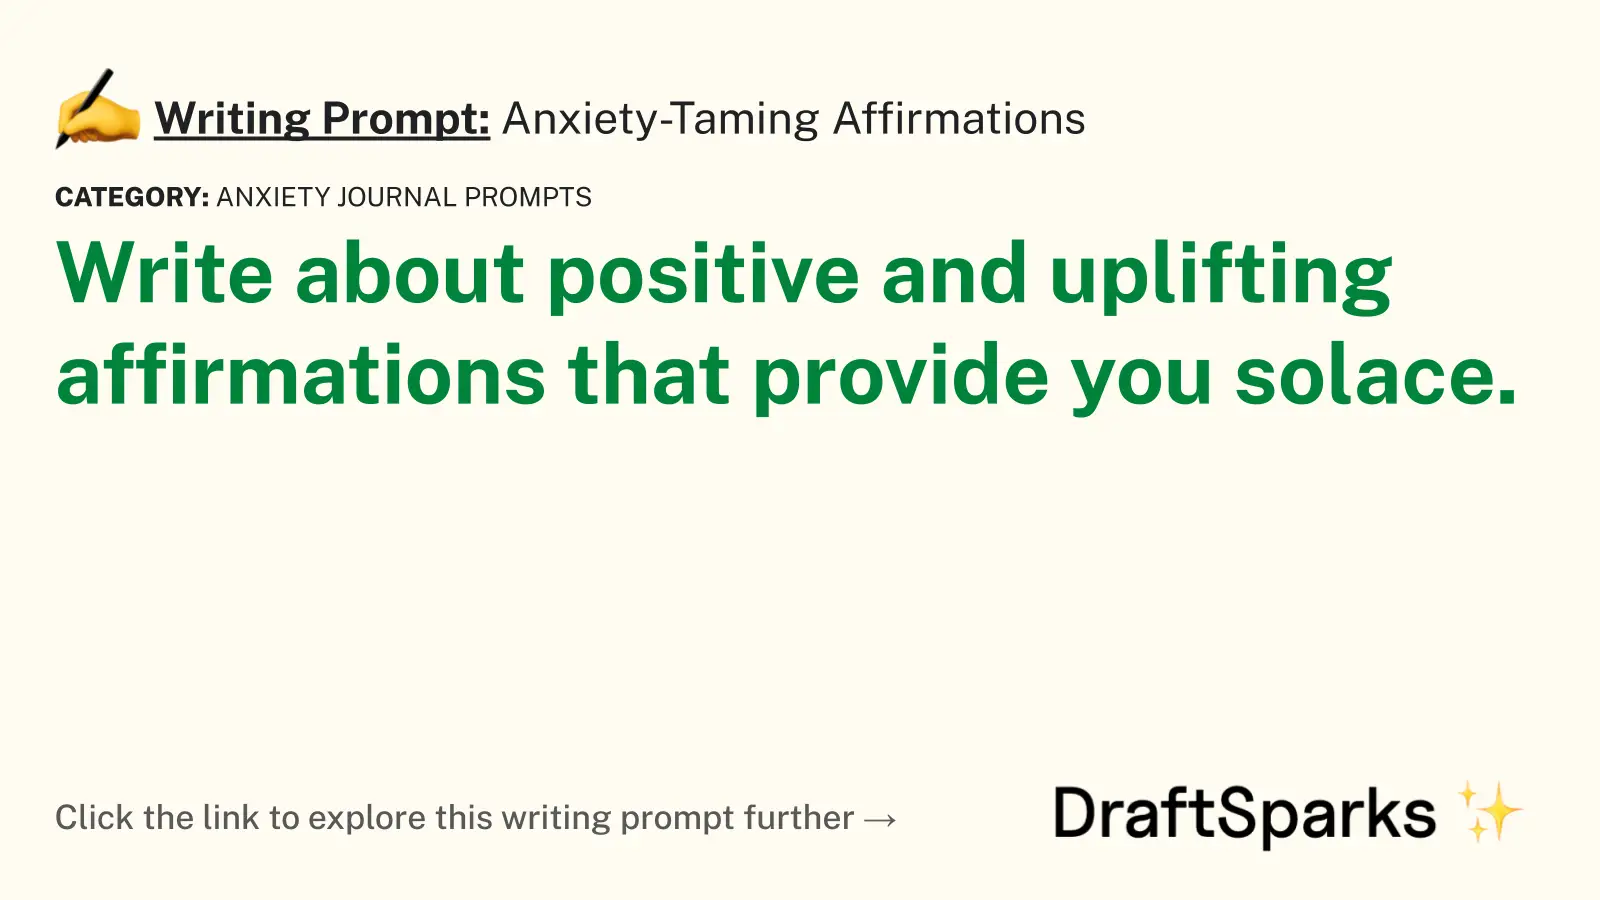 Anxiety-Taming Affirmations